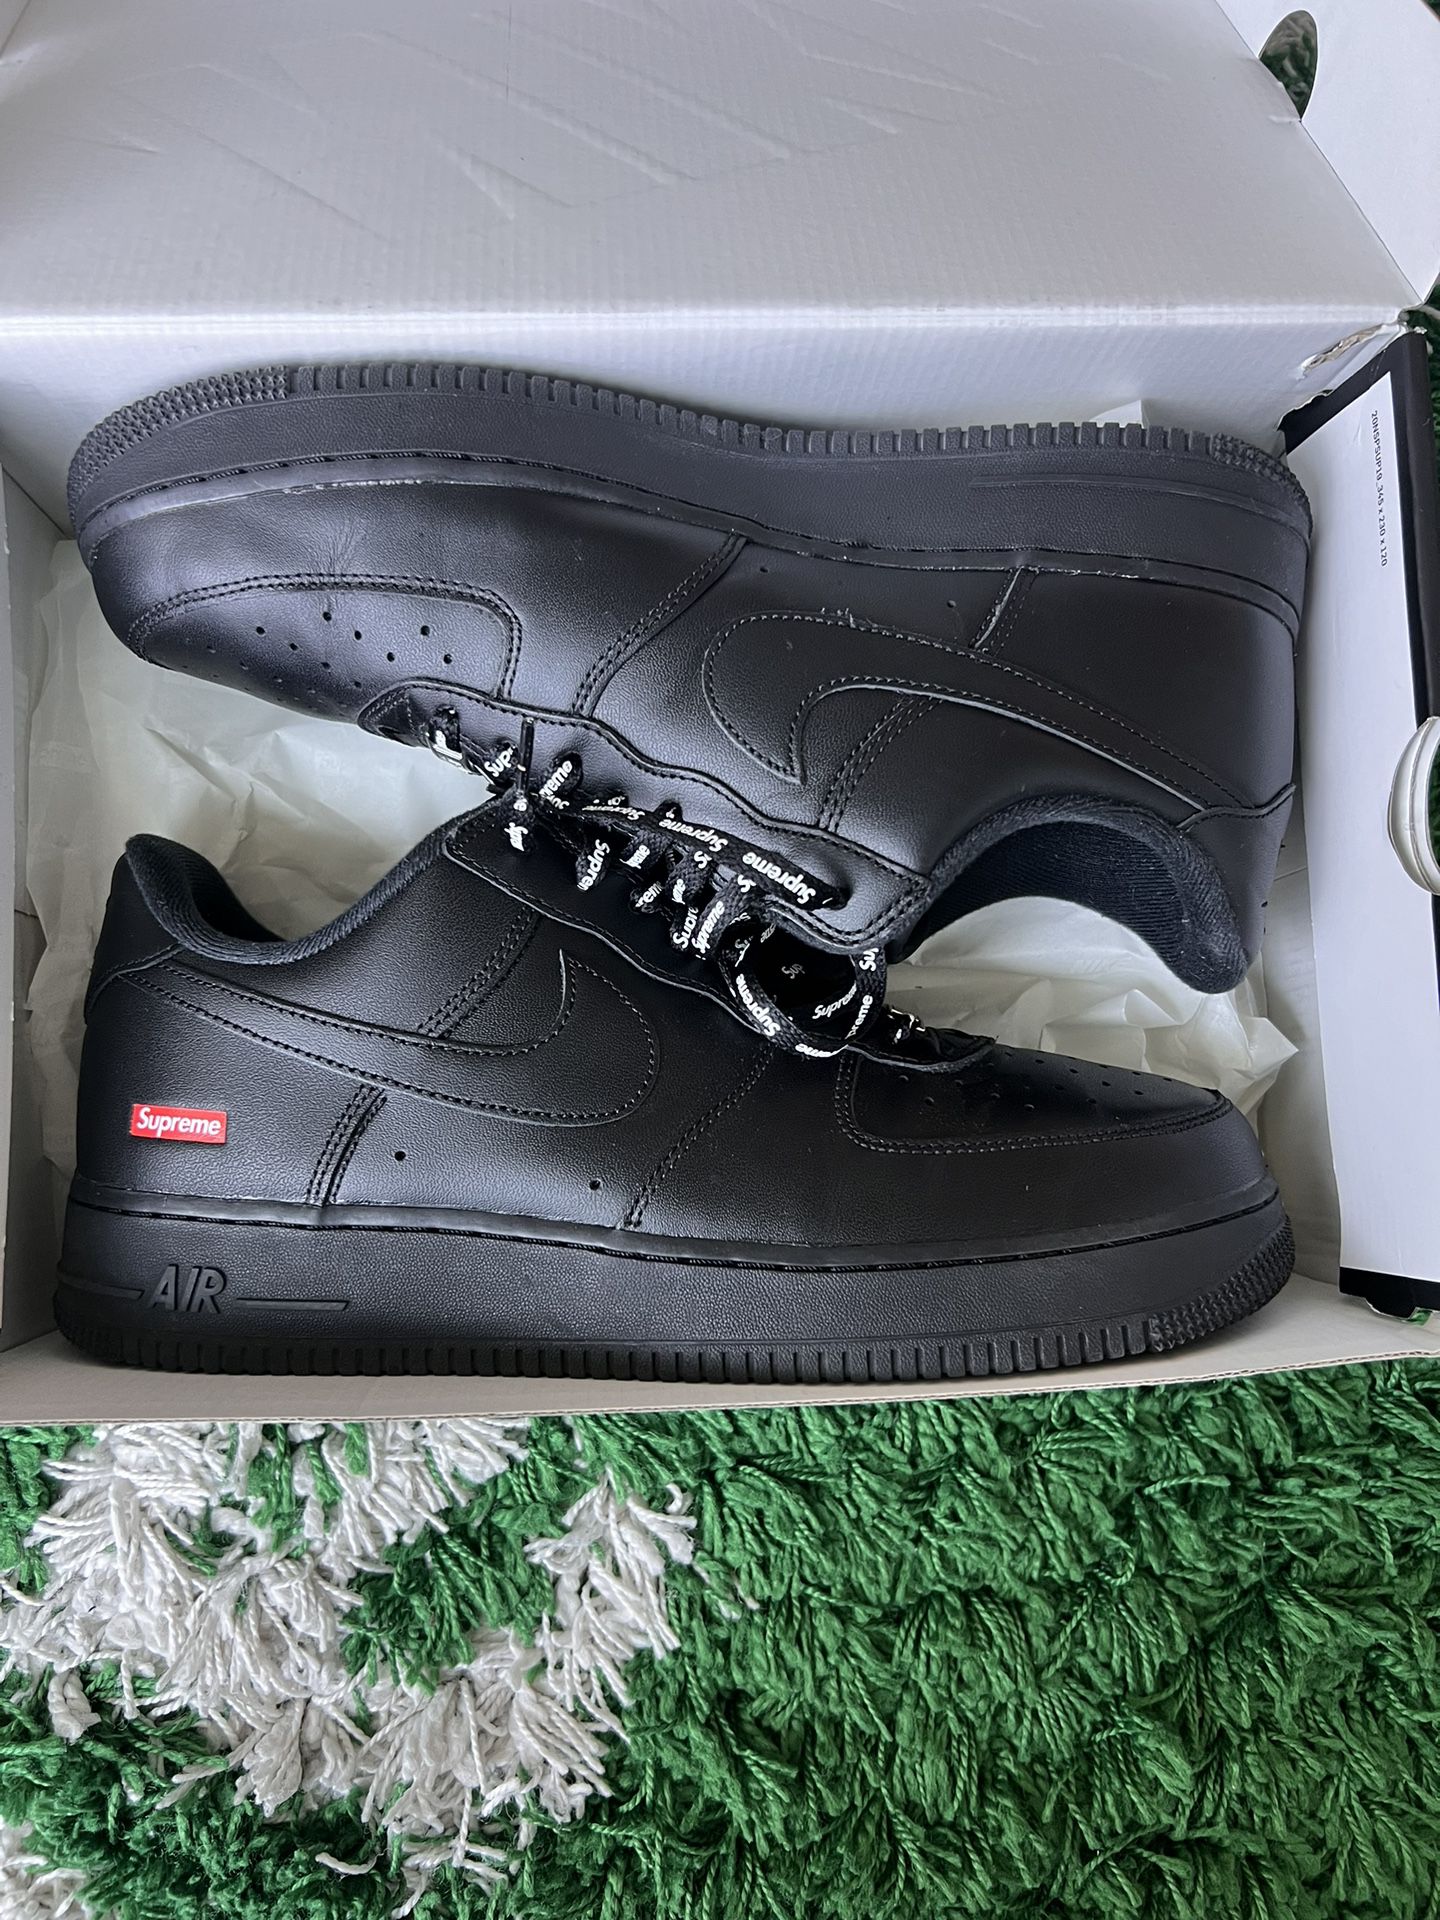 Nike Air Force 1 Supreme Black Size 11.5 100% Authentic 